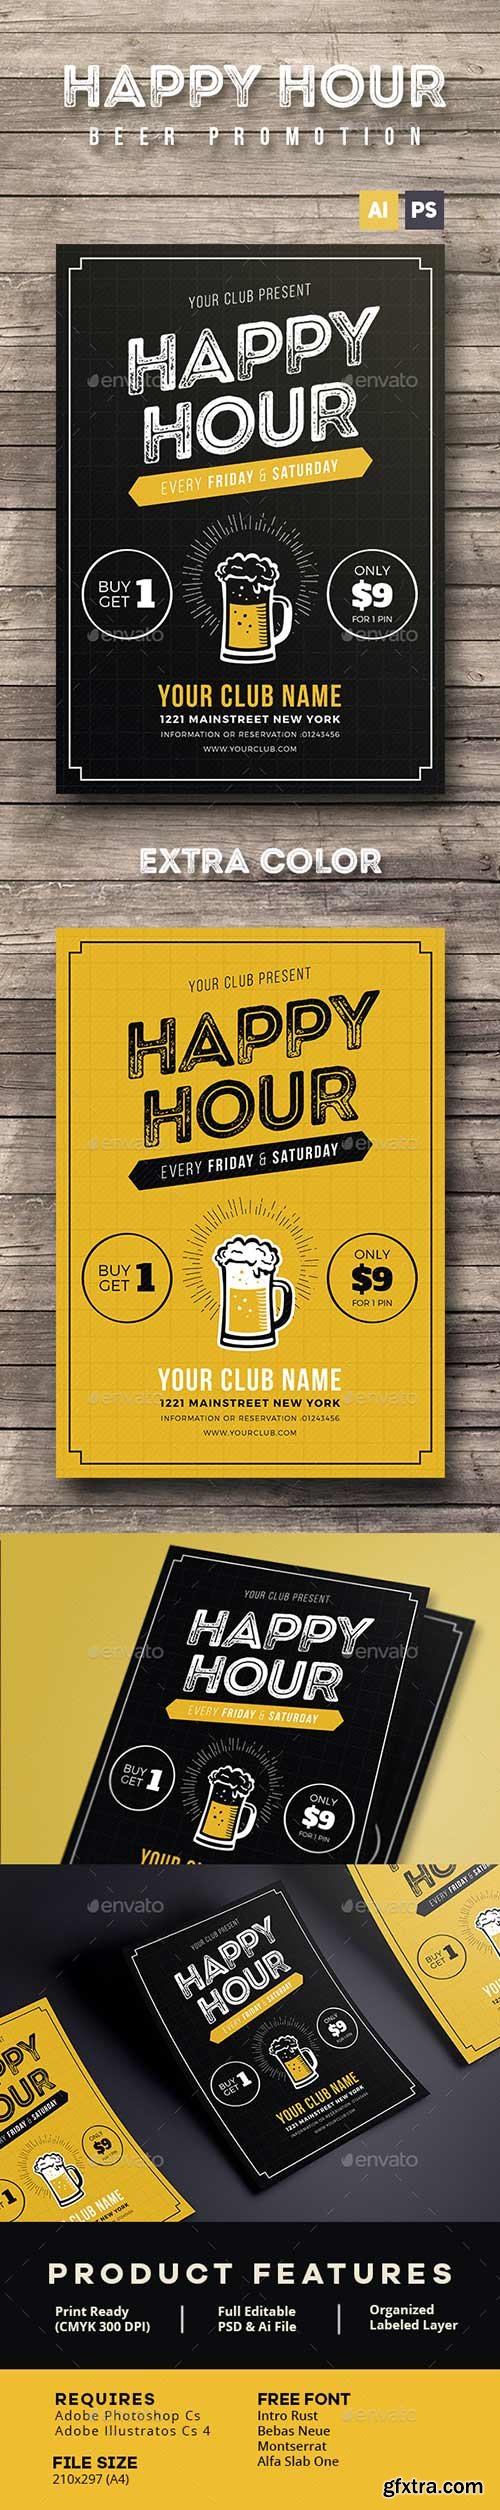 Graphicriver - Happy Hour Beer Promotion Flyer / Poster 16267985